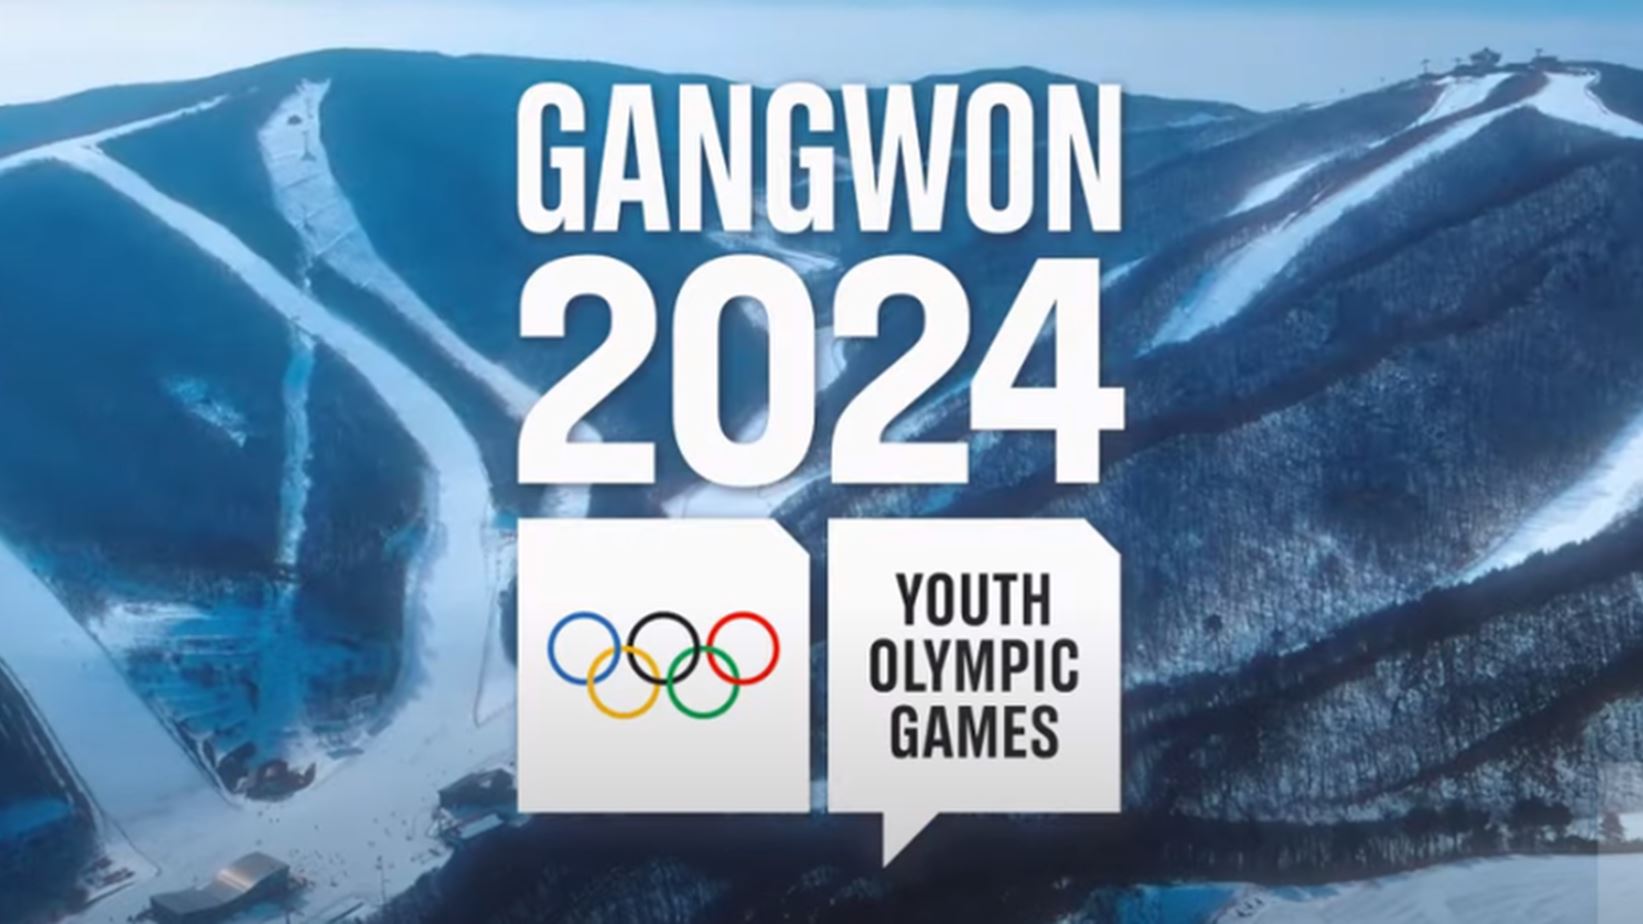 FILA WILL BE PRESENT AT THE YOG 2024 WITH 4 NATIONAL TEAMS THE YOUNGSTERS GEAR UP FOR THE YOUTH OLYMPIC GAMES IN KOREA